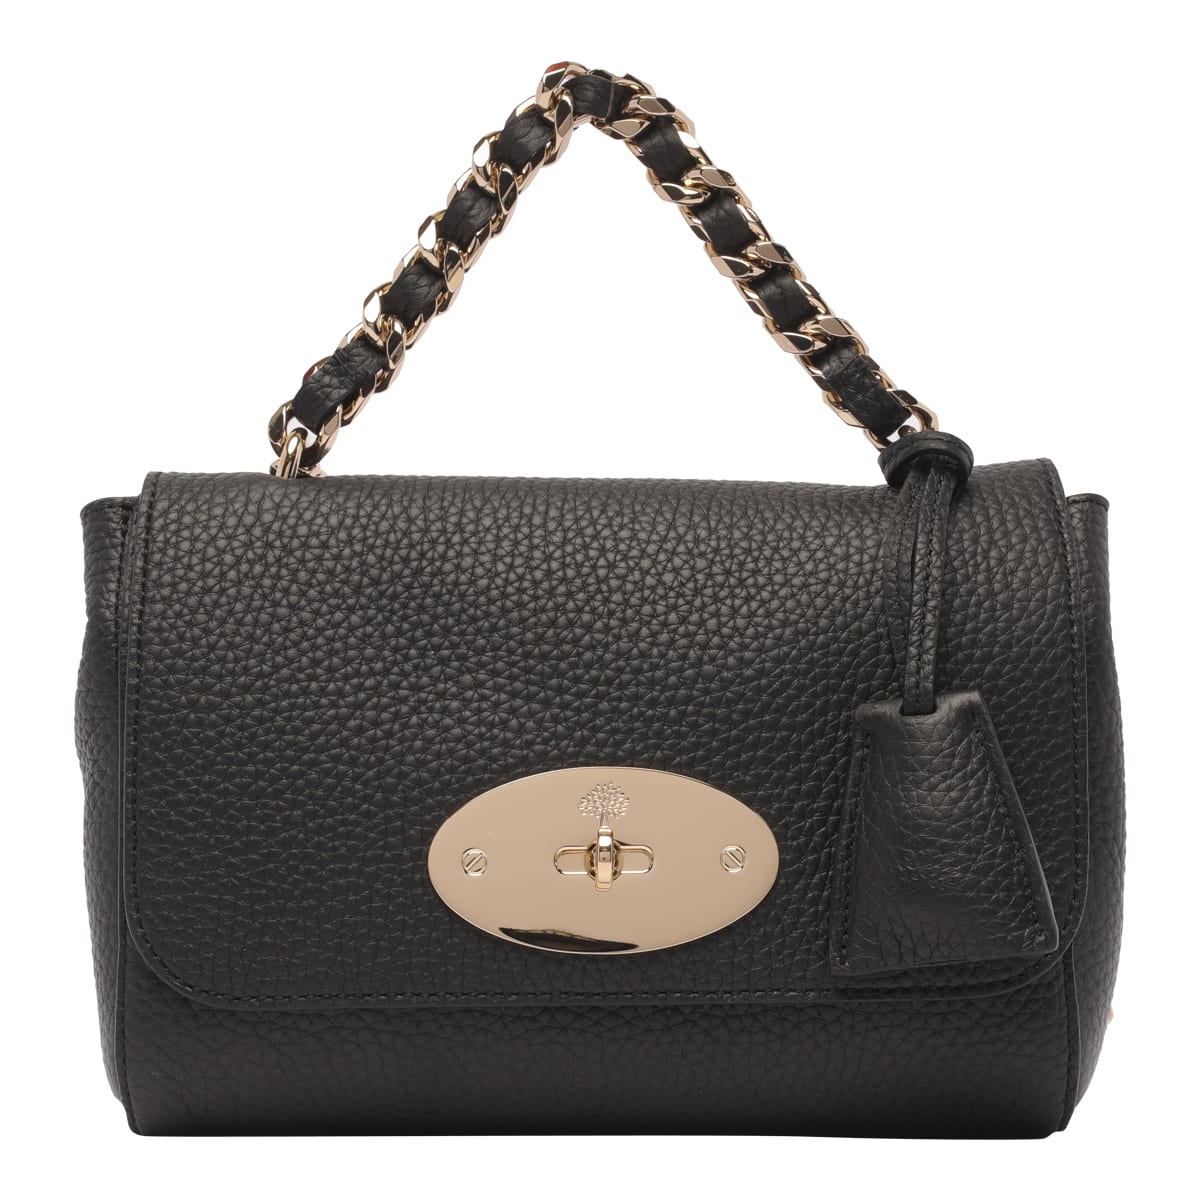 MULBERRY TOP HANDLE LILY BAG